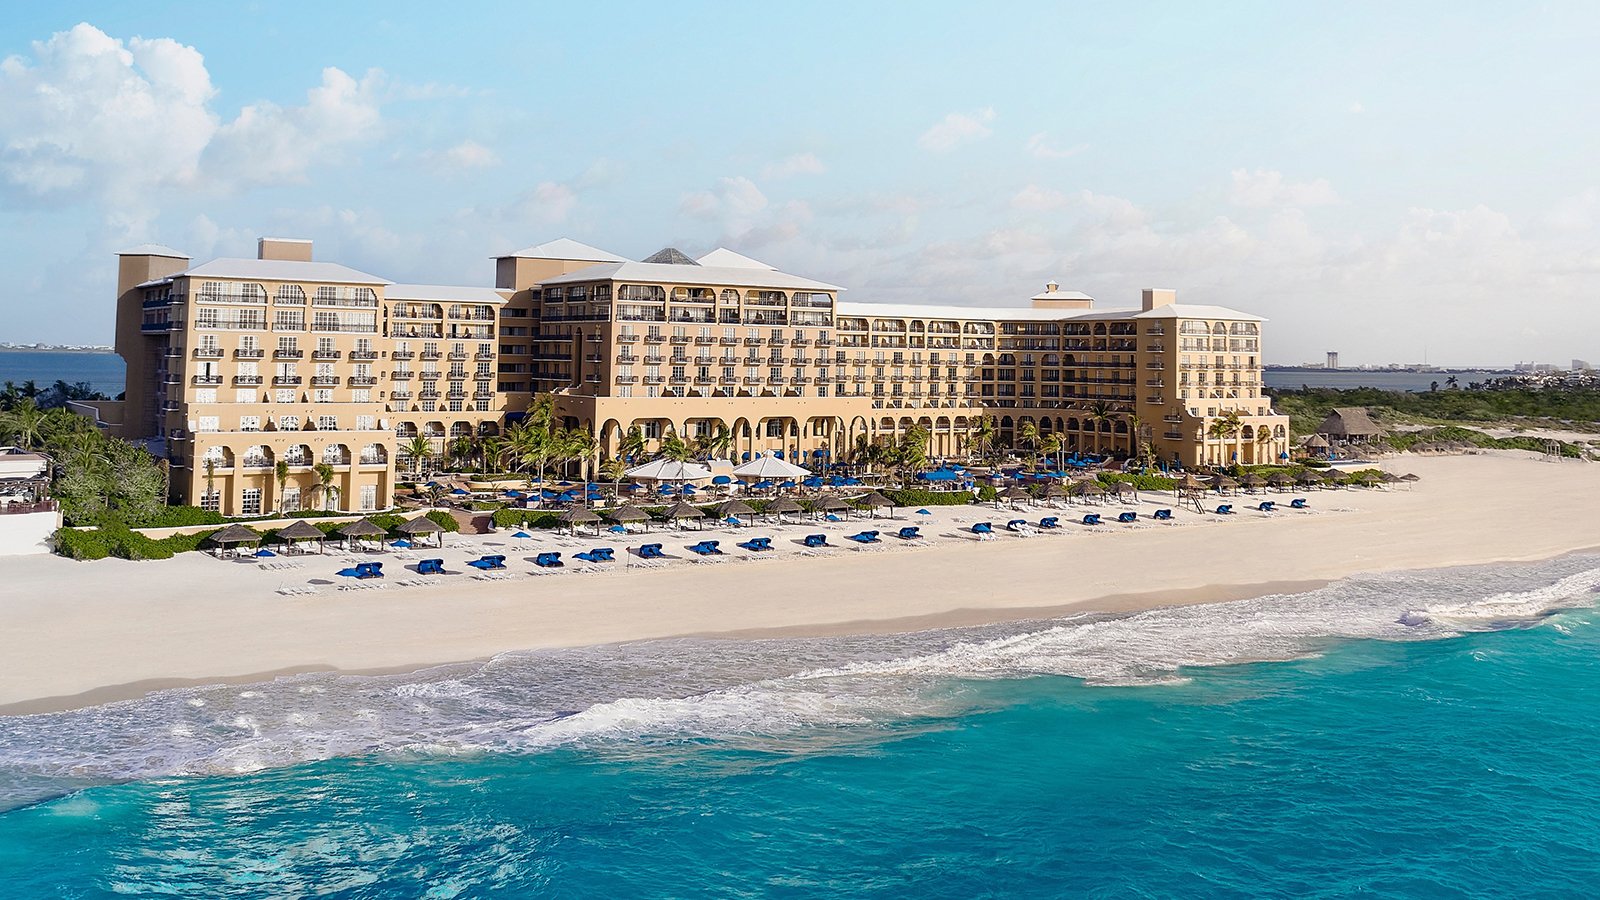 Kempinski moves into Cancun with luxurious beach hotel